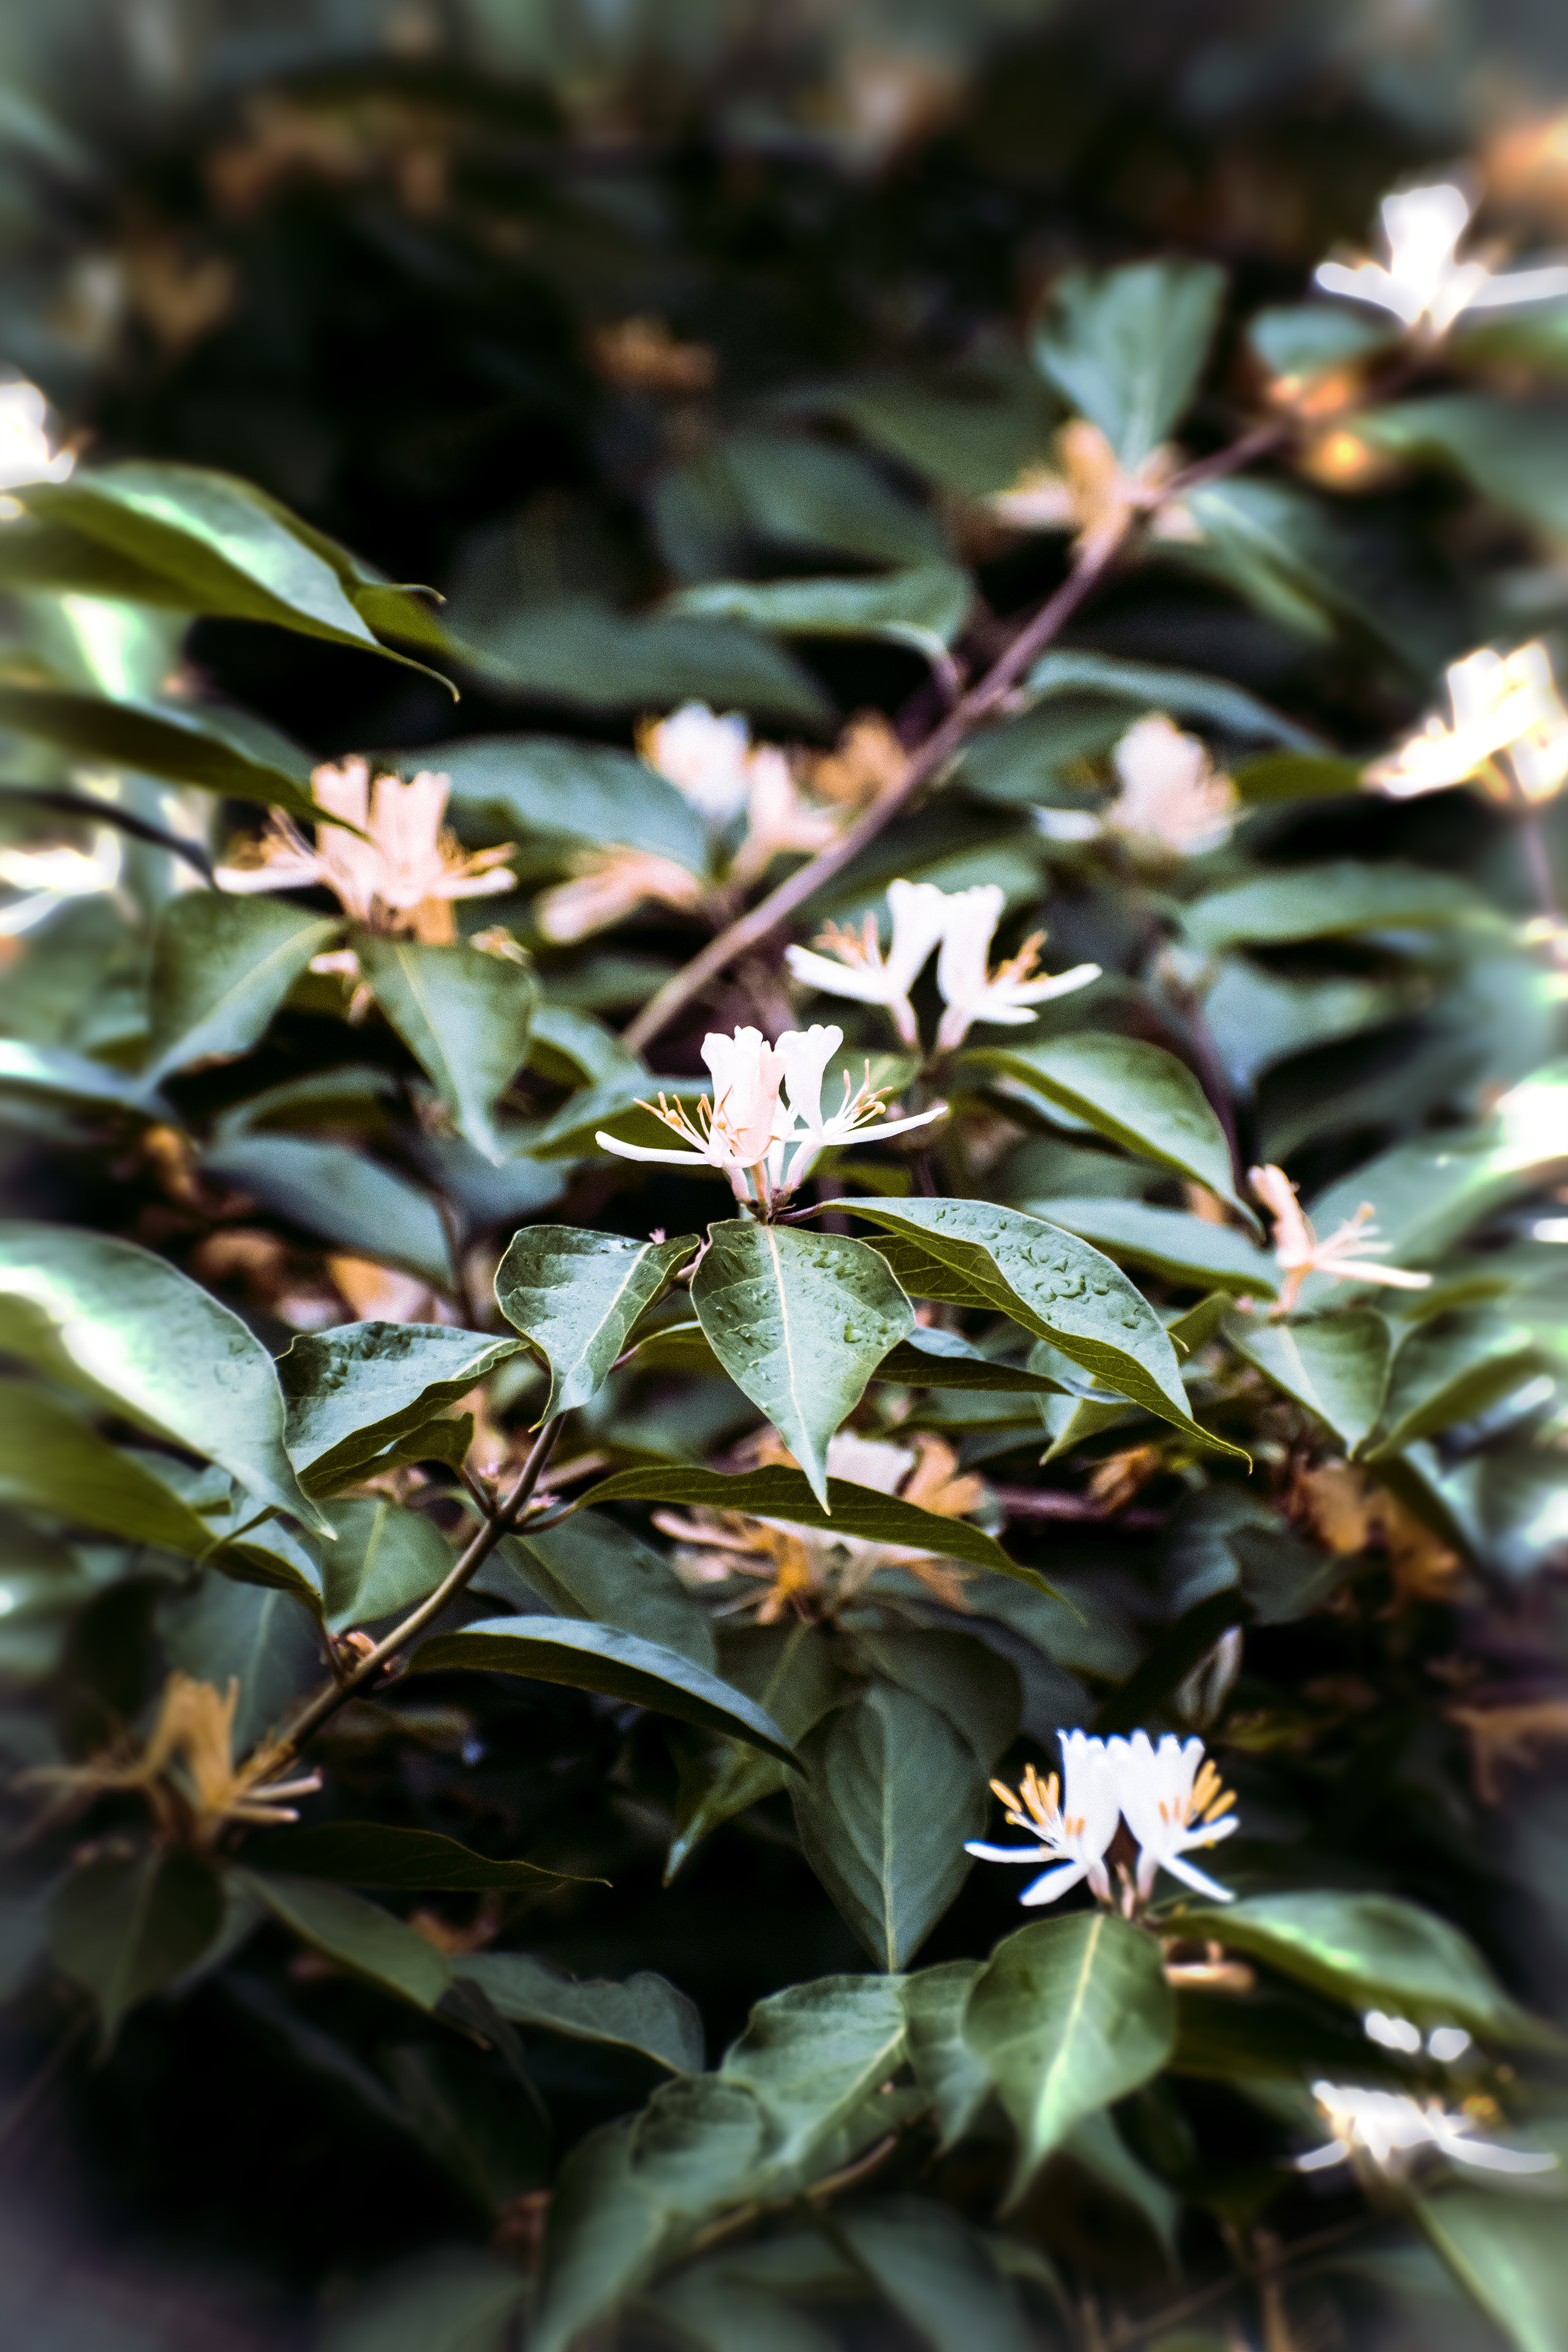 General 2560x3840 morning blossoms green flowers plants May spring rain leaves nature closeup portrait display